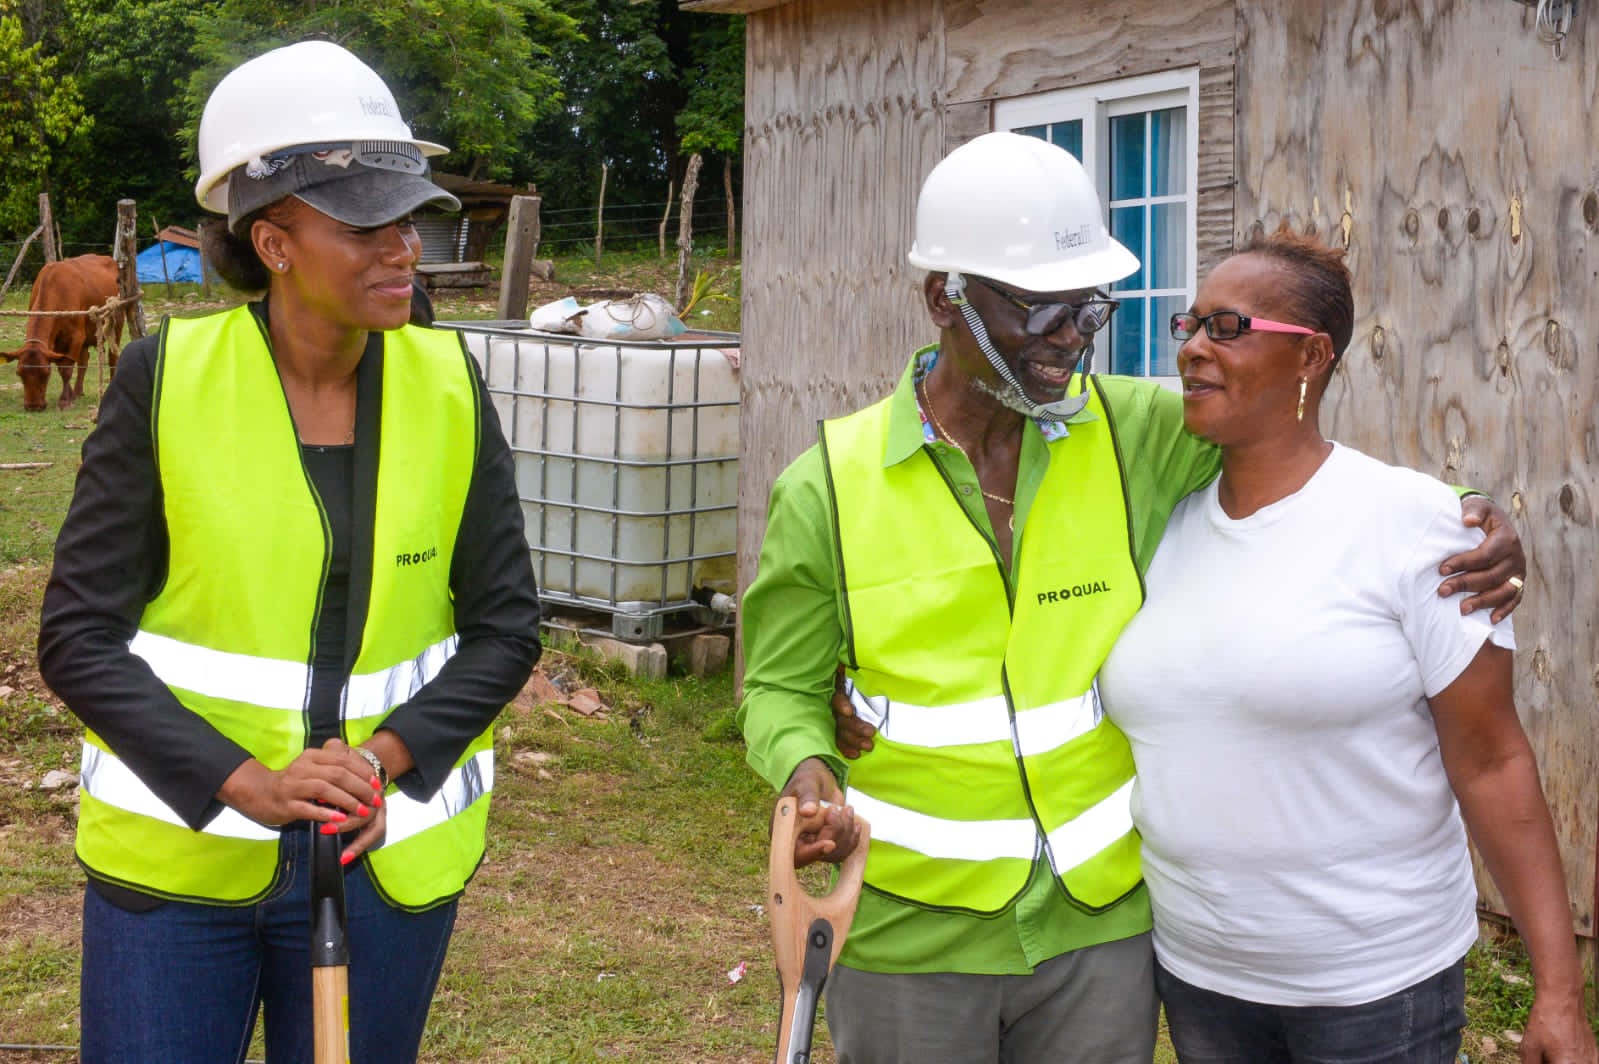 Ground broken for house in Kendal, Manchester  -project part of $300m spend by Local Gov’t in the parish